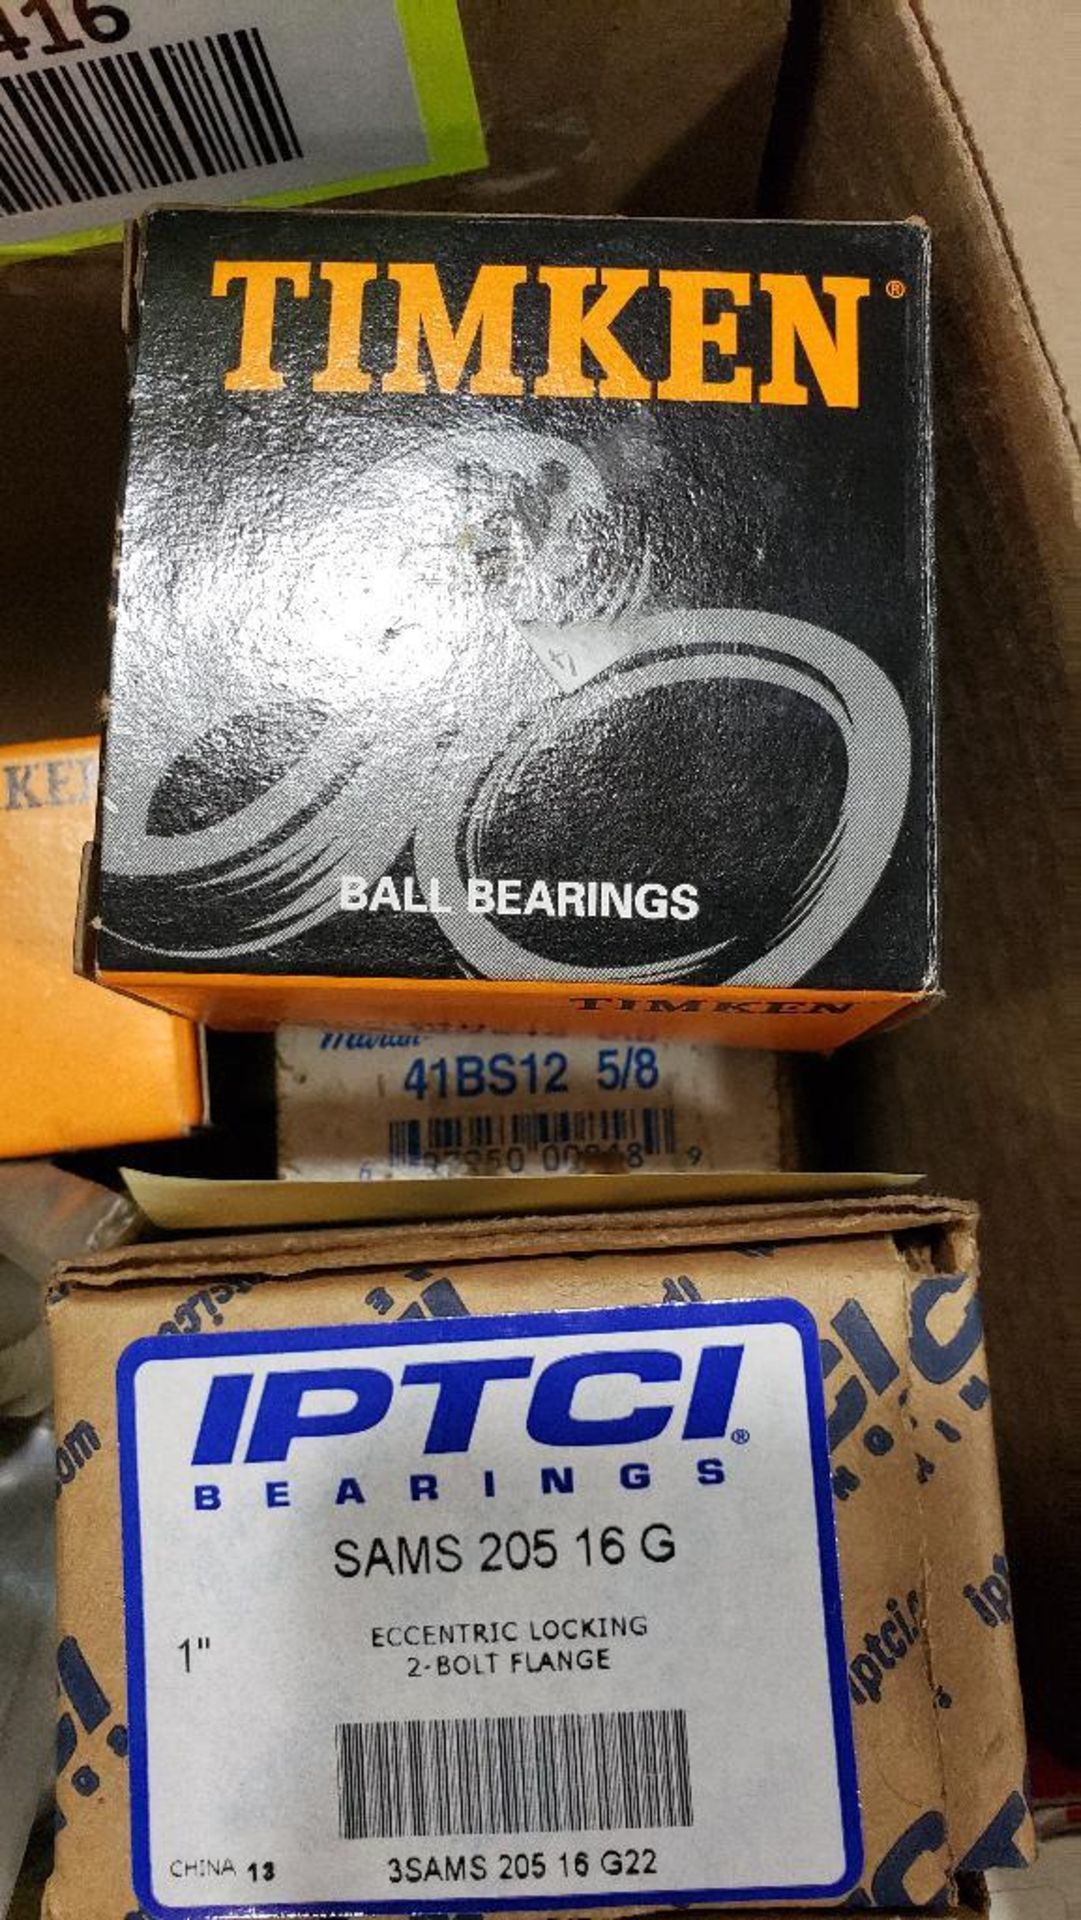 Assorted bearings. New in box.